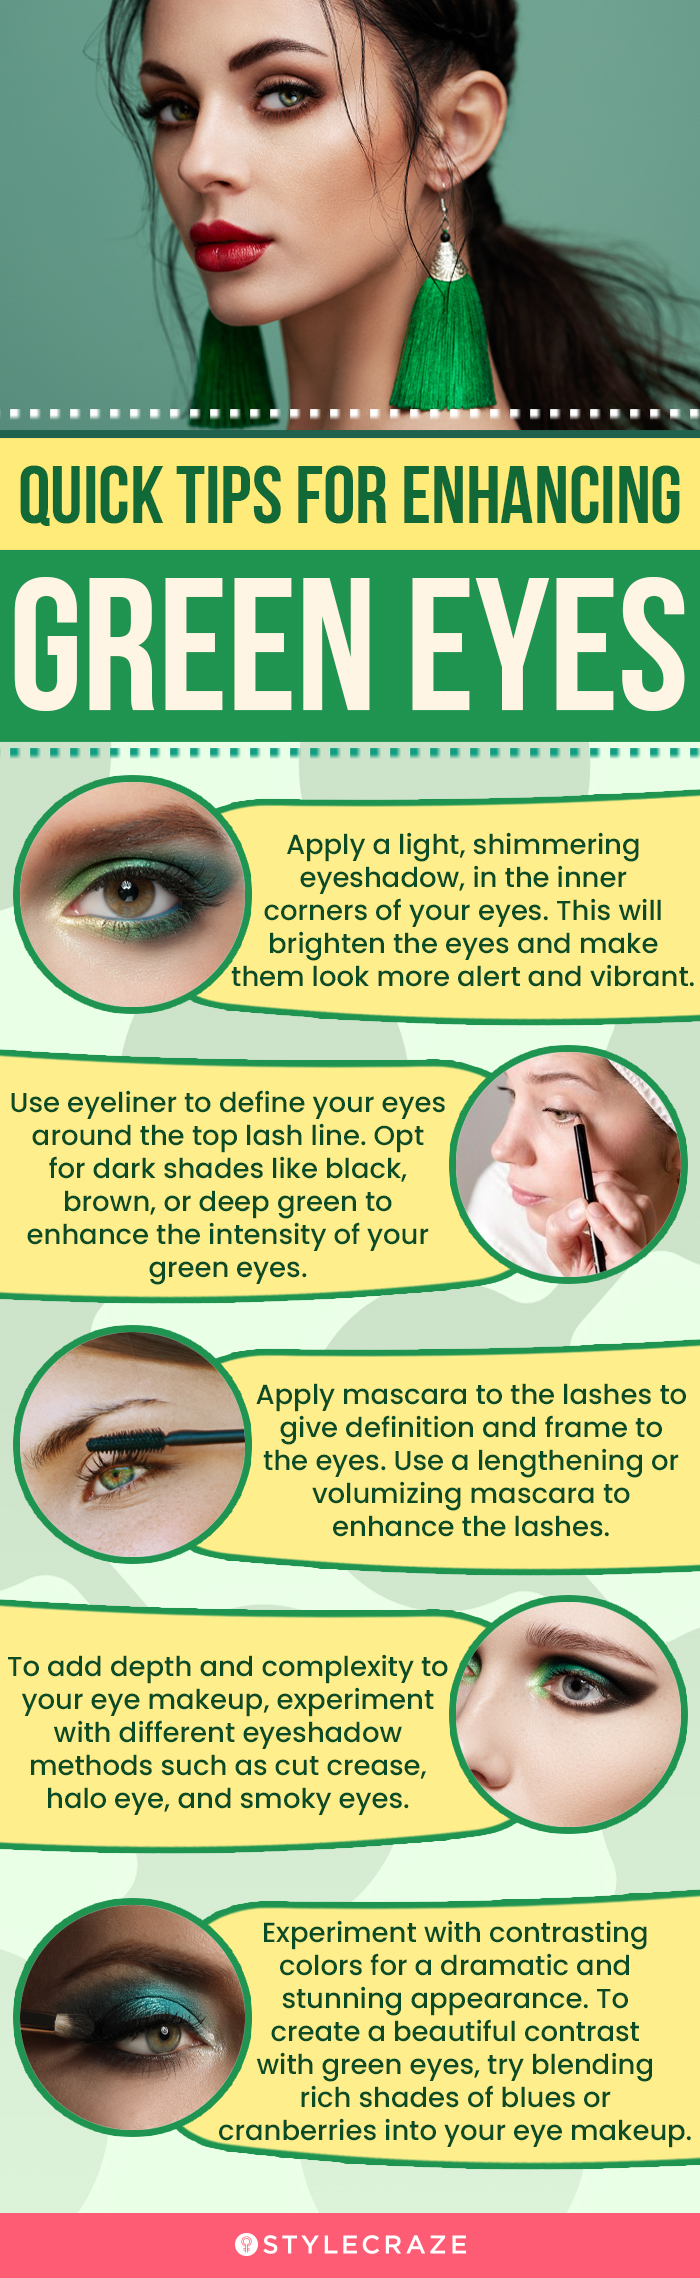 Quick Tips For Enhancing Green Eyes (infographic)